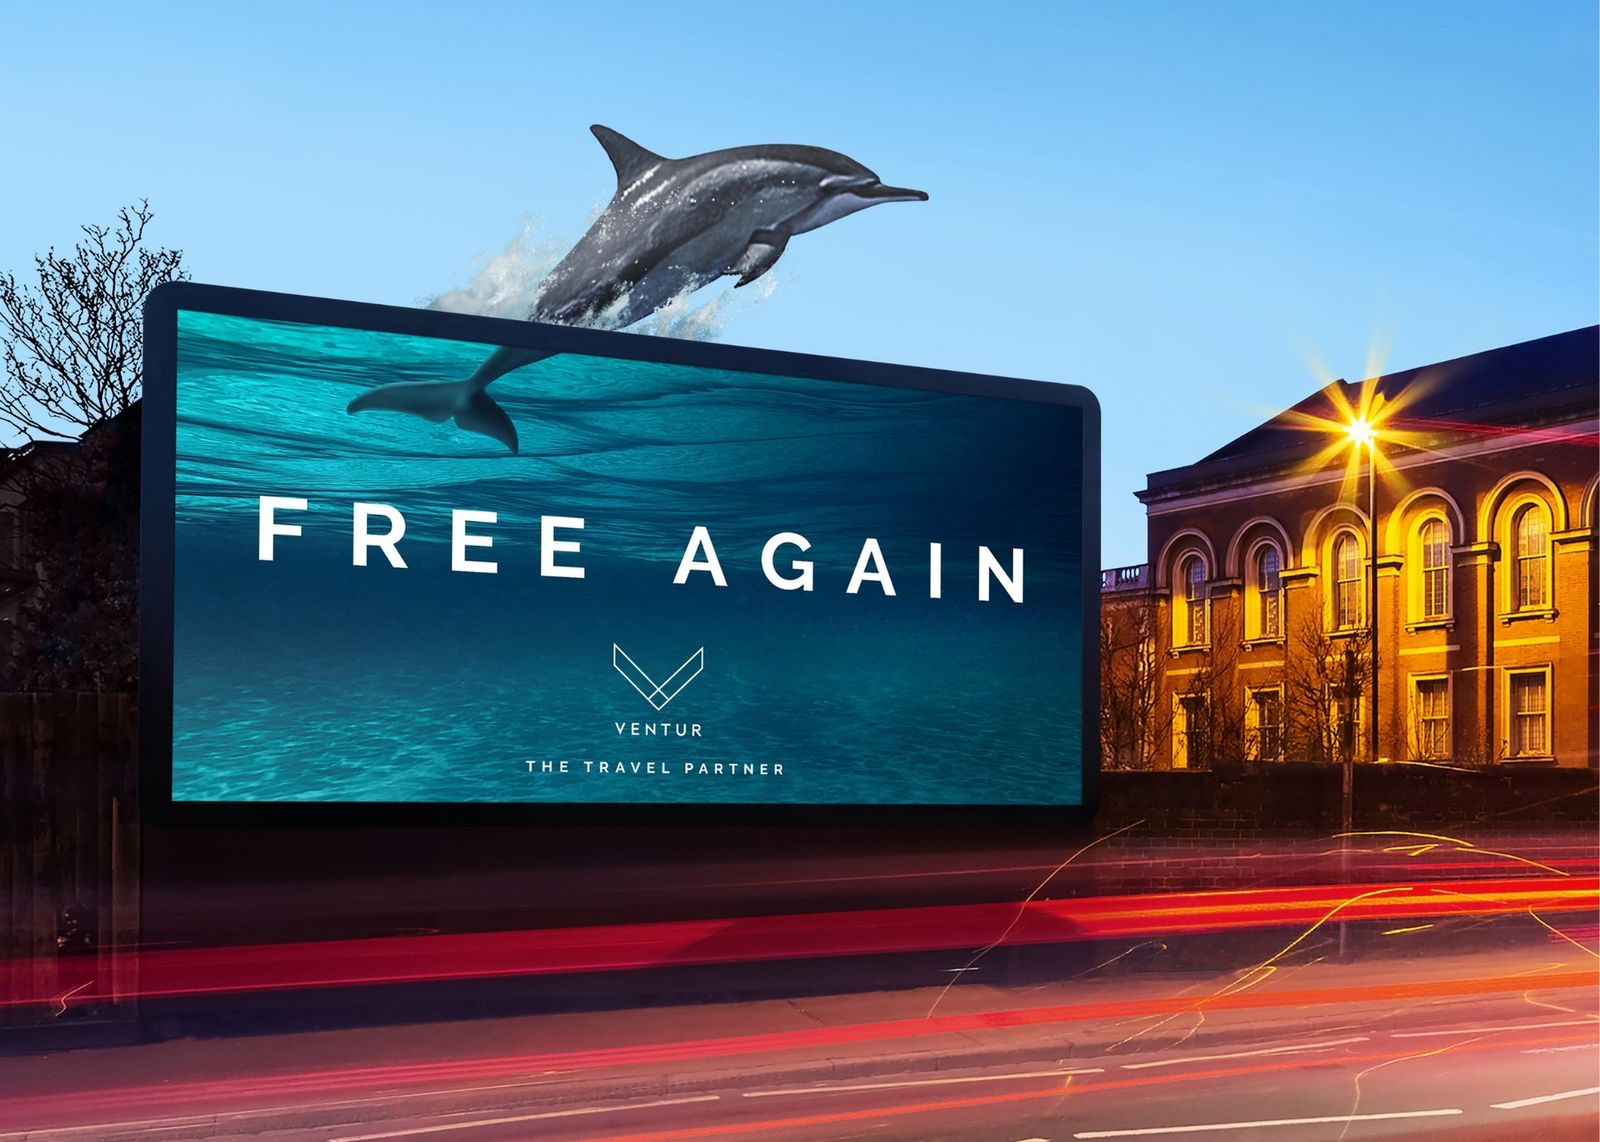 Connect, explore and celebrate being ‘Free Again’